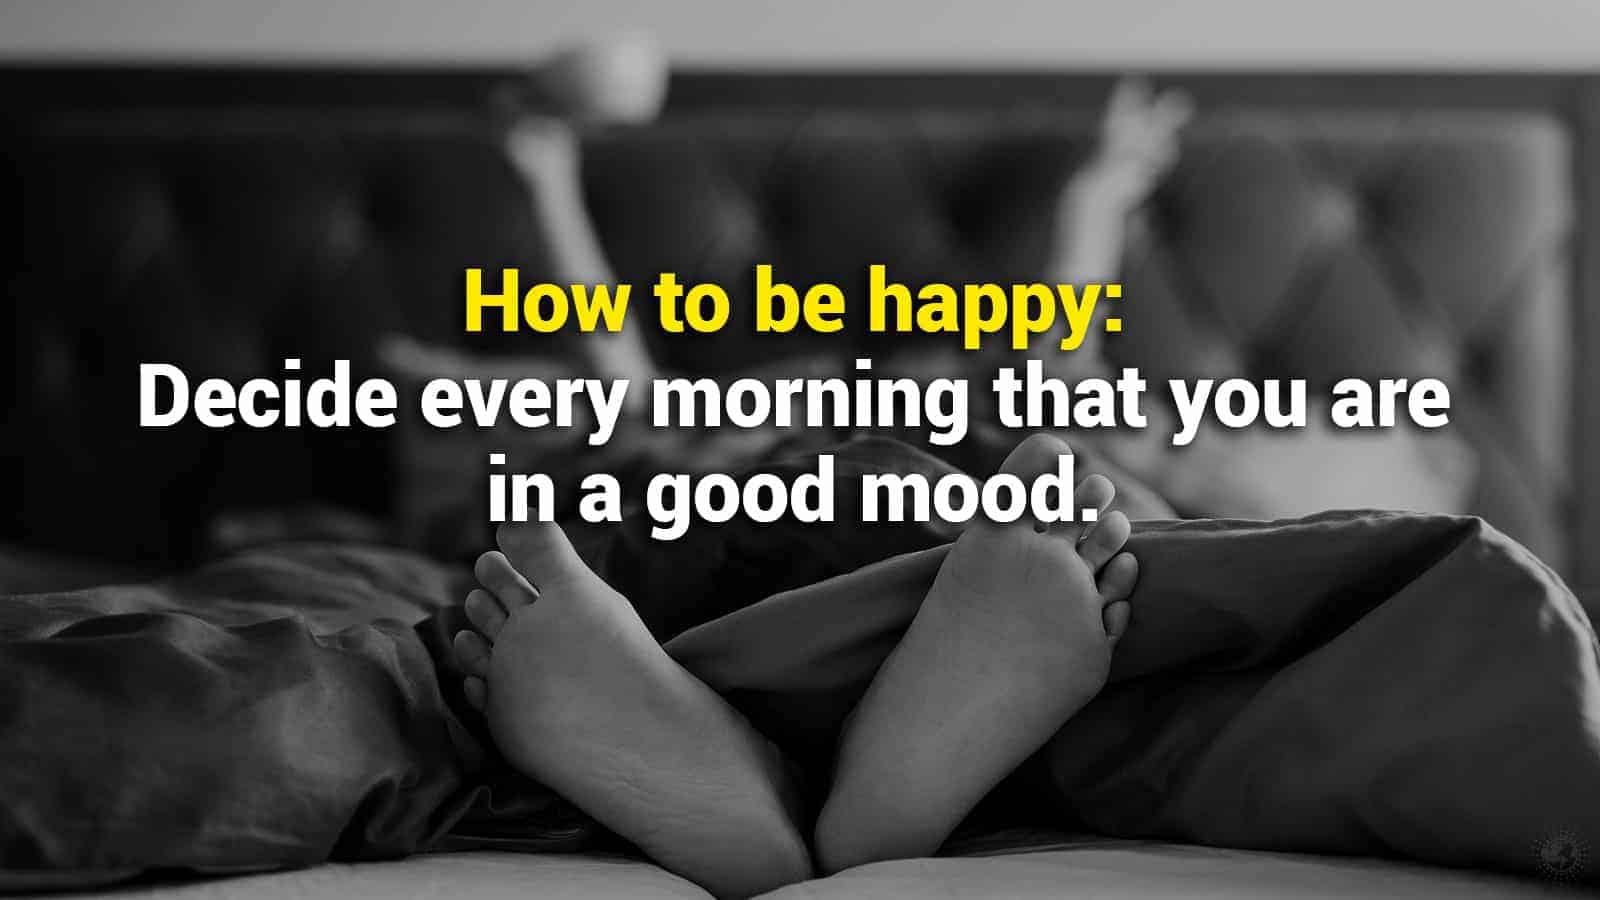 15 Quotes on How to Be Happy Even When You’re Not Feeling It